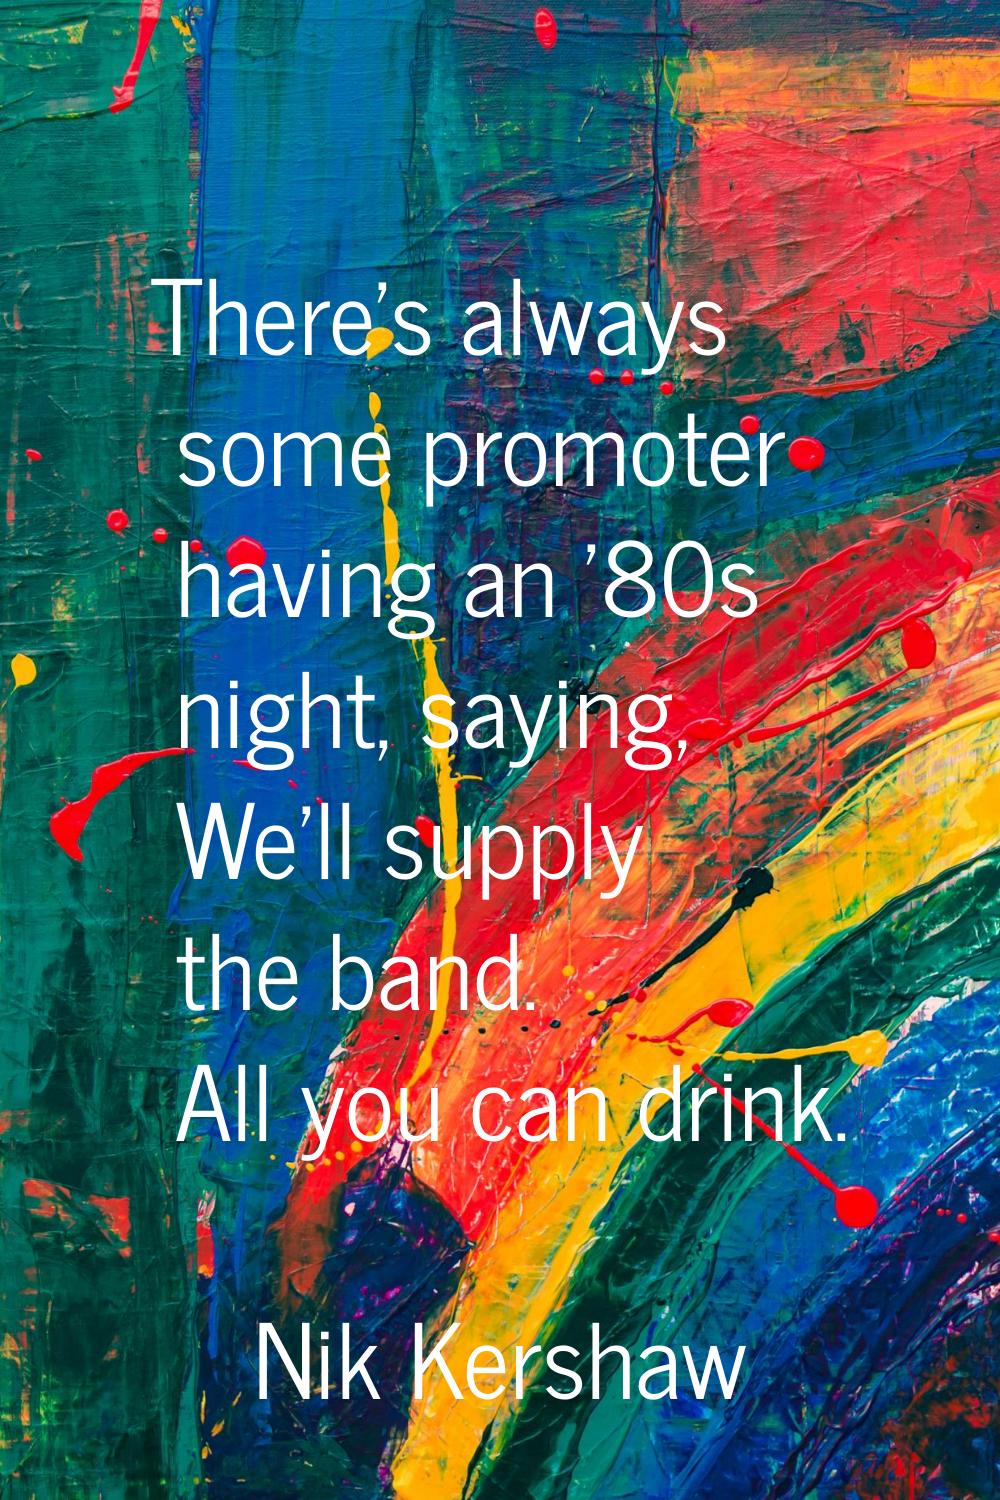 There's always some promoter having an '80s night, saying, We'll supply the band. All you can drink